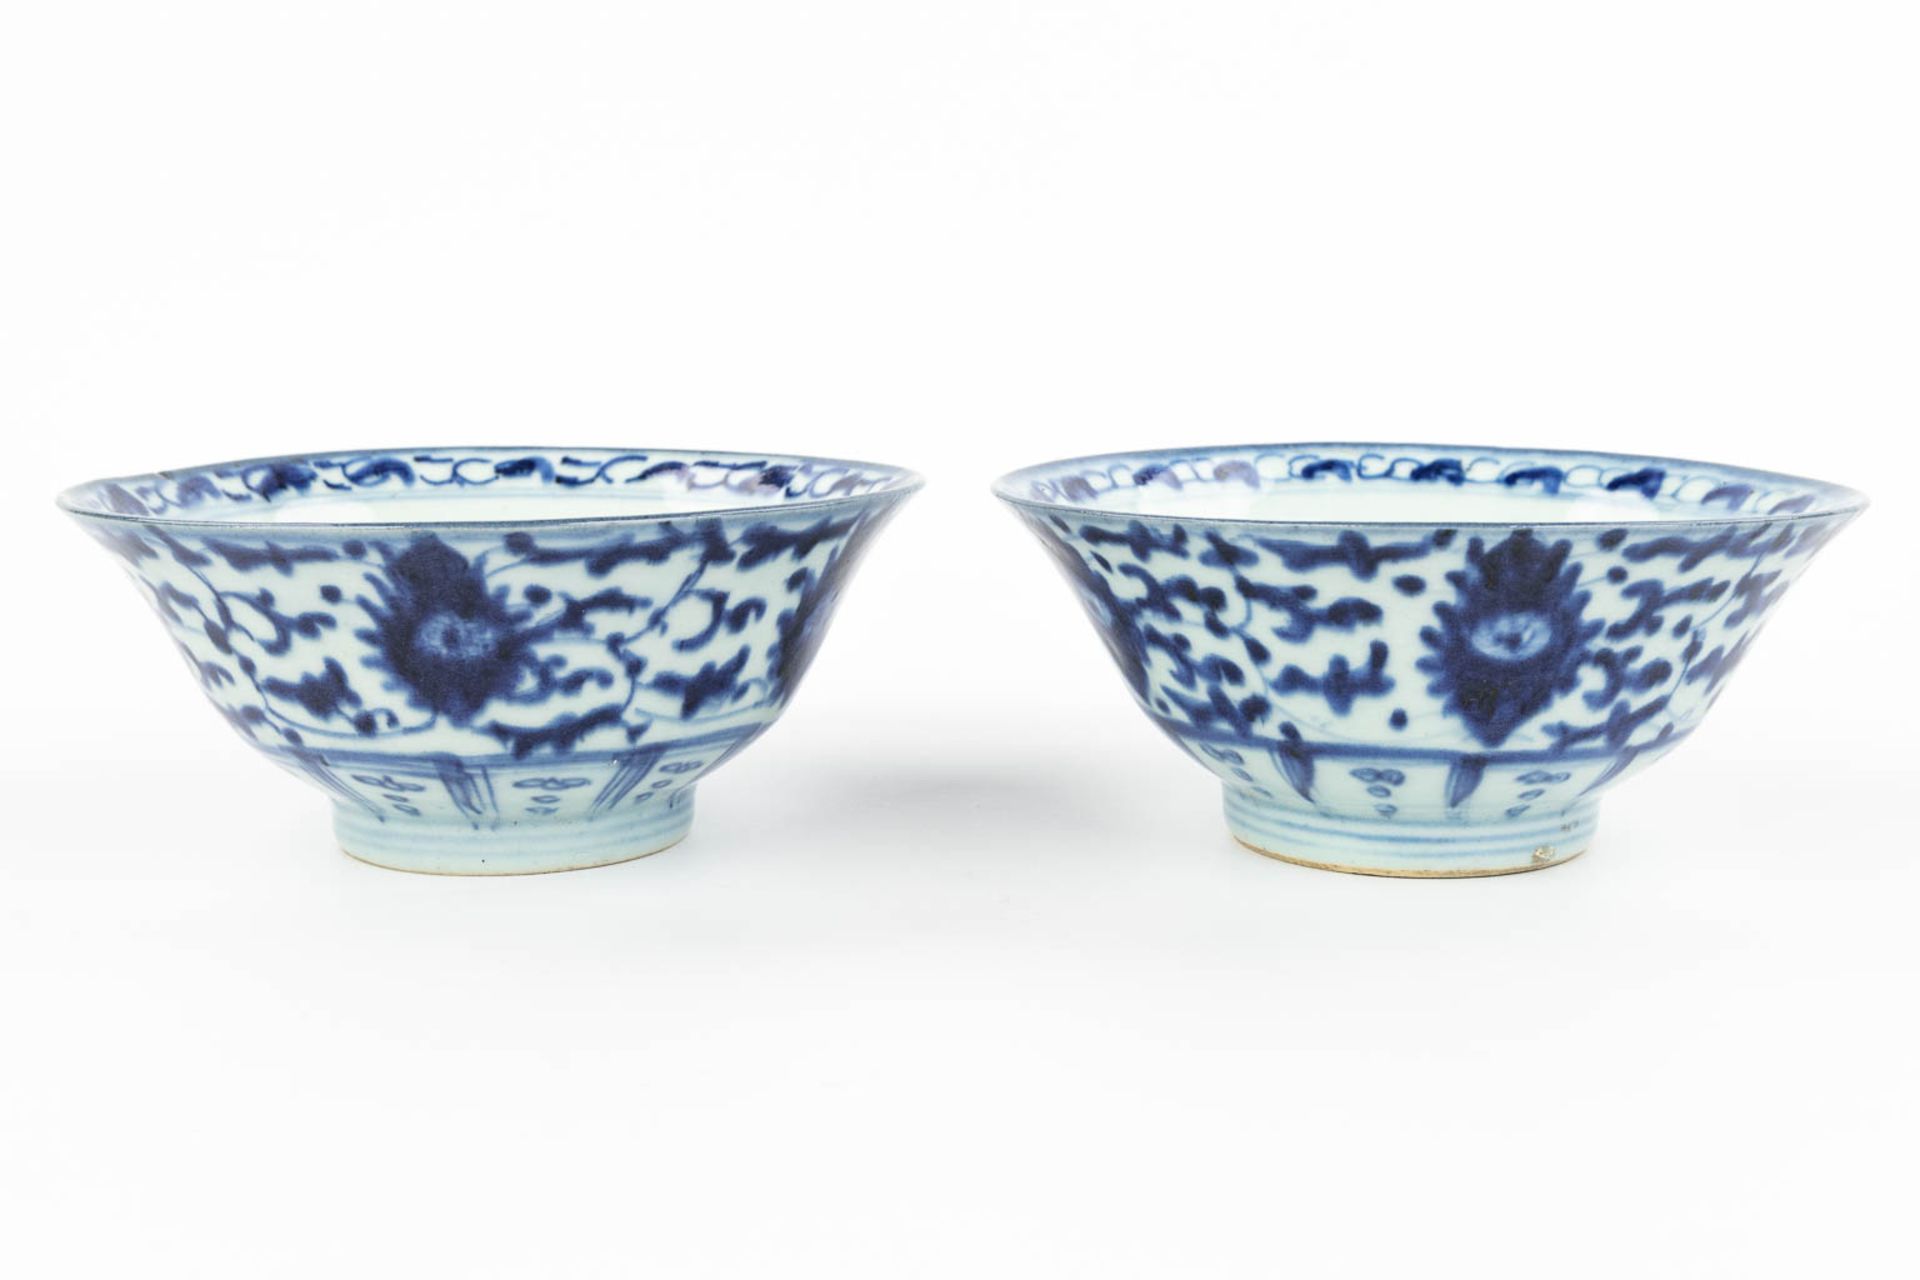 A pair of Chinese bowls made of porcelain with a blue-white decor. (H:7,2cm) - Image 3 of 13